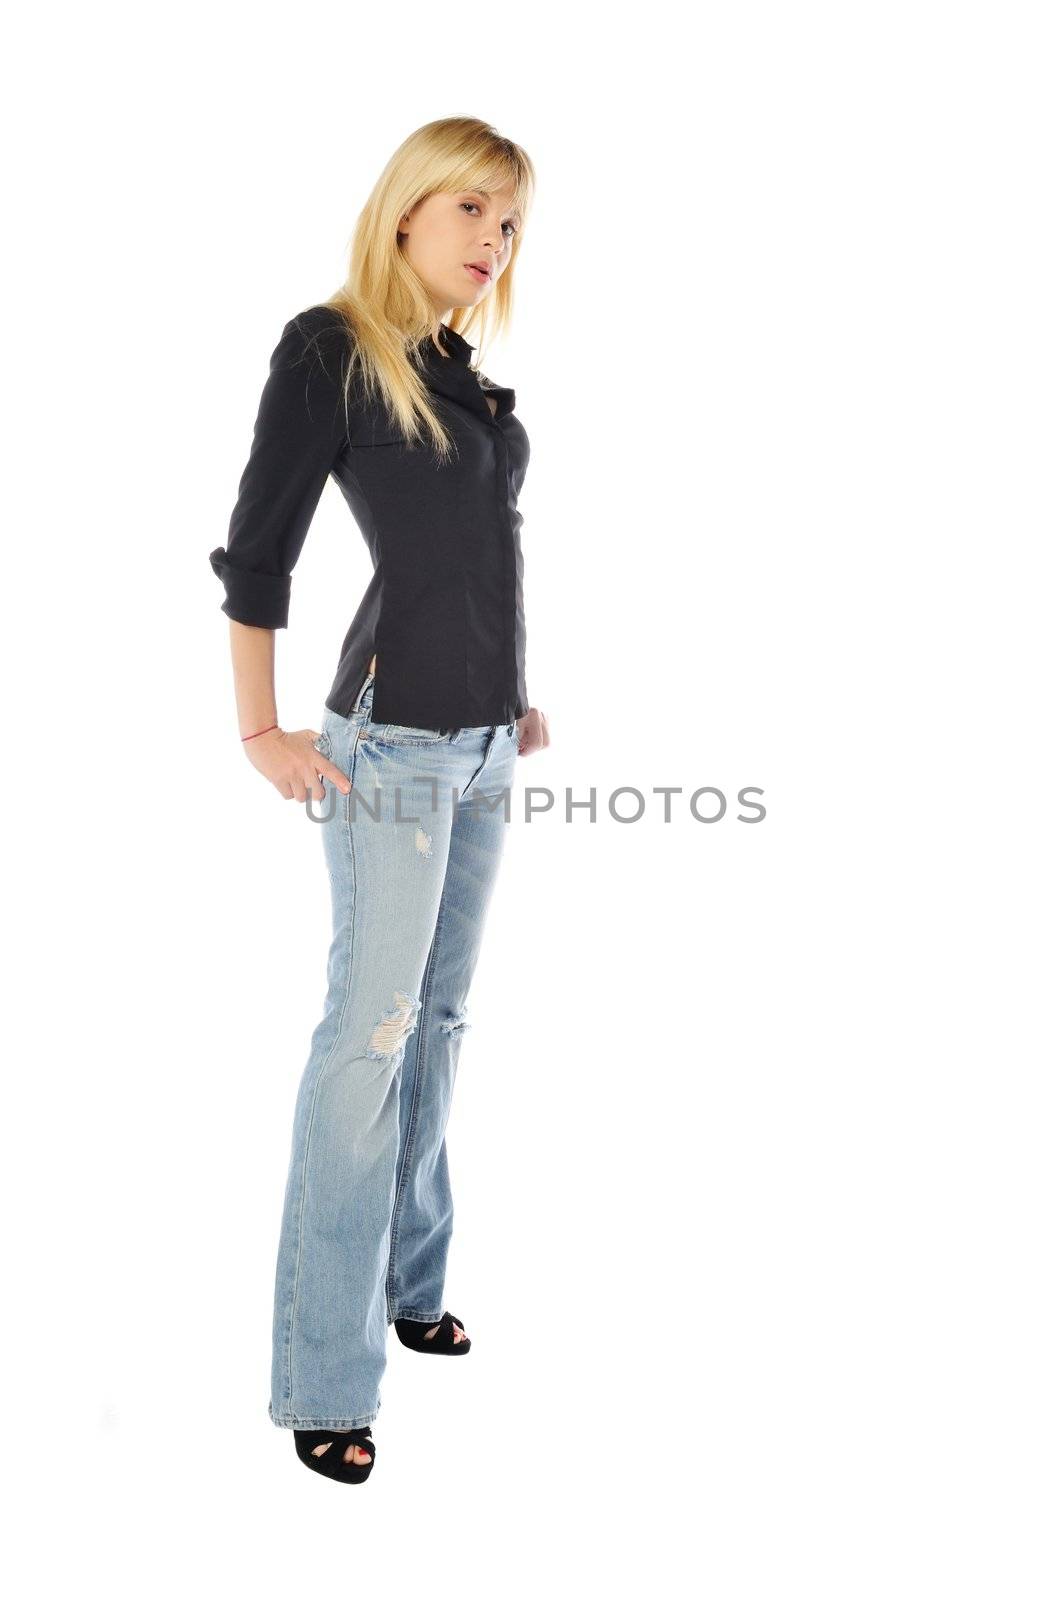 tall skinny blond by PDImages